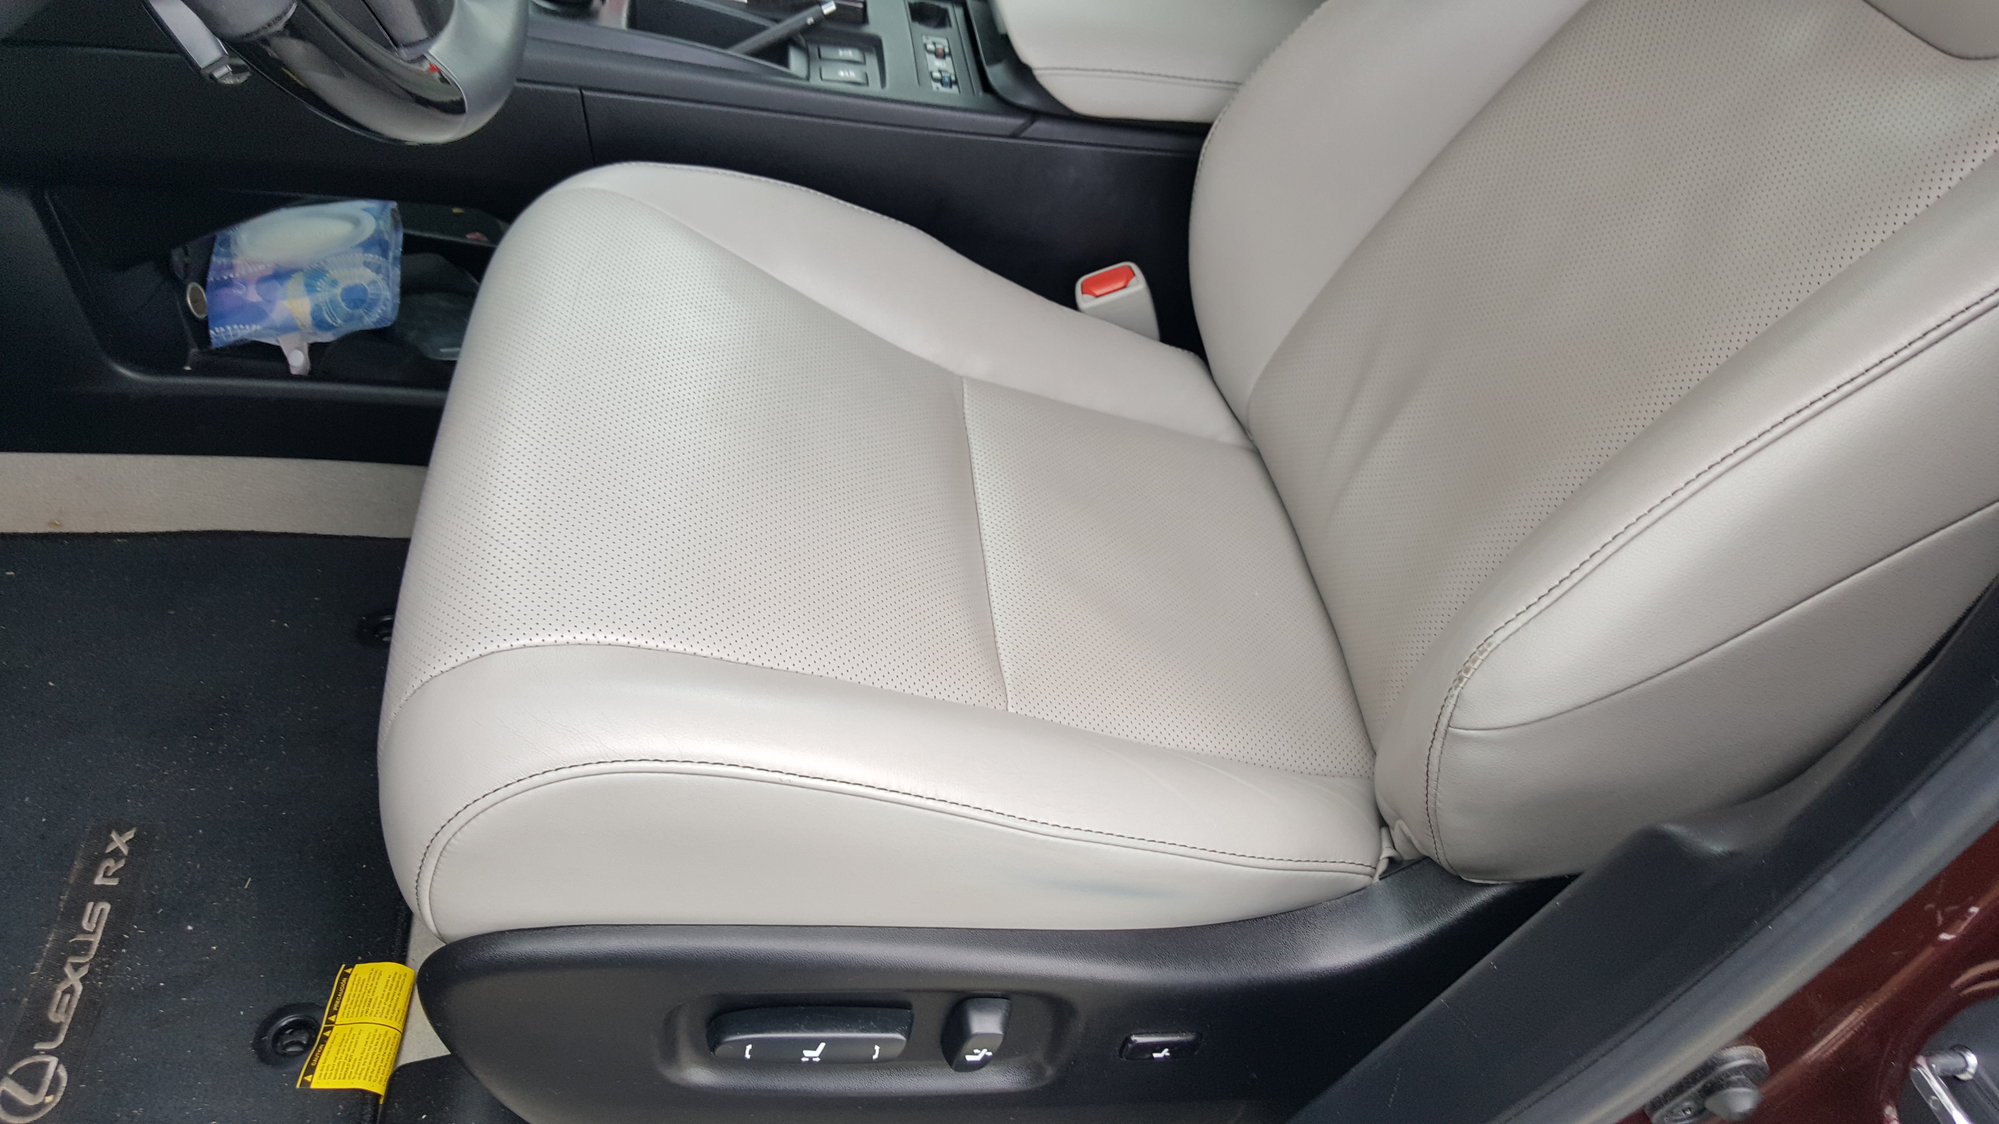 Best Leather Cleaner Conditioner For Lexus Interior Clublexus Forum Discussion - How To Clean Leather Seats In Lexus